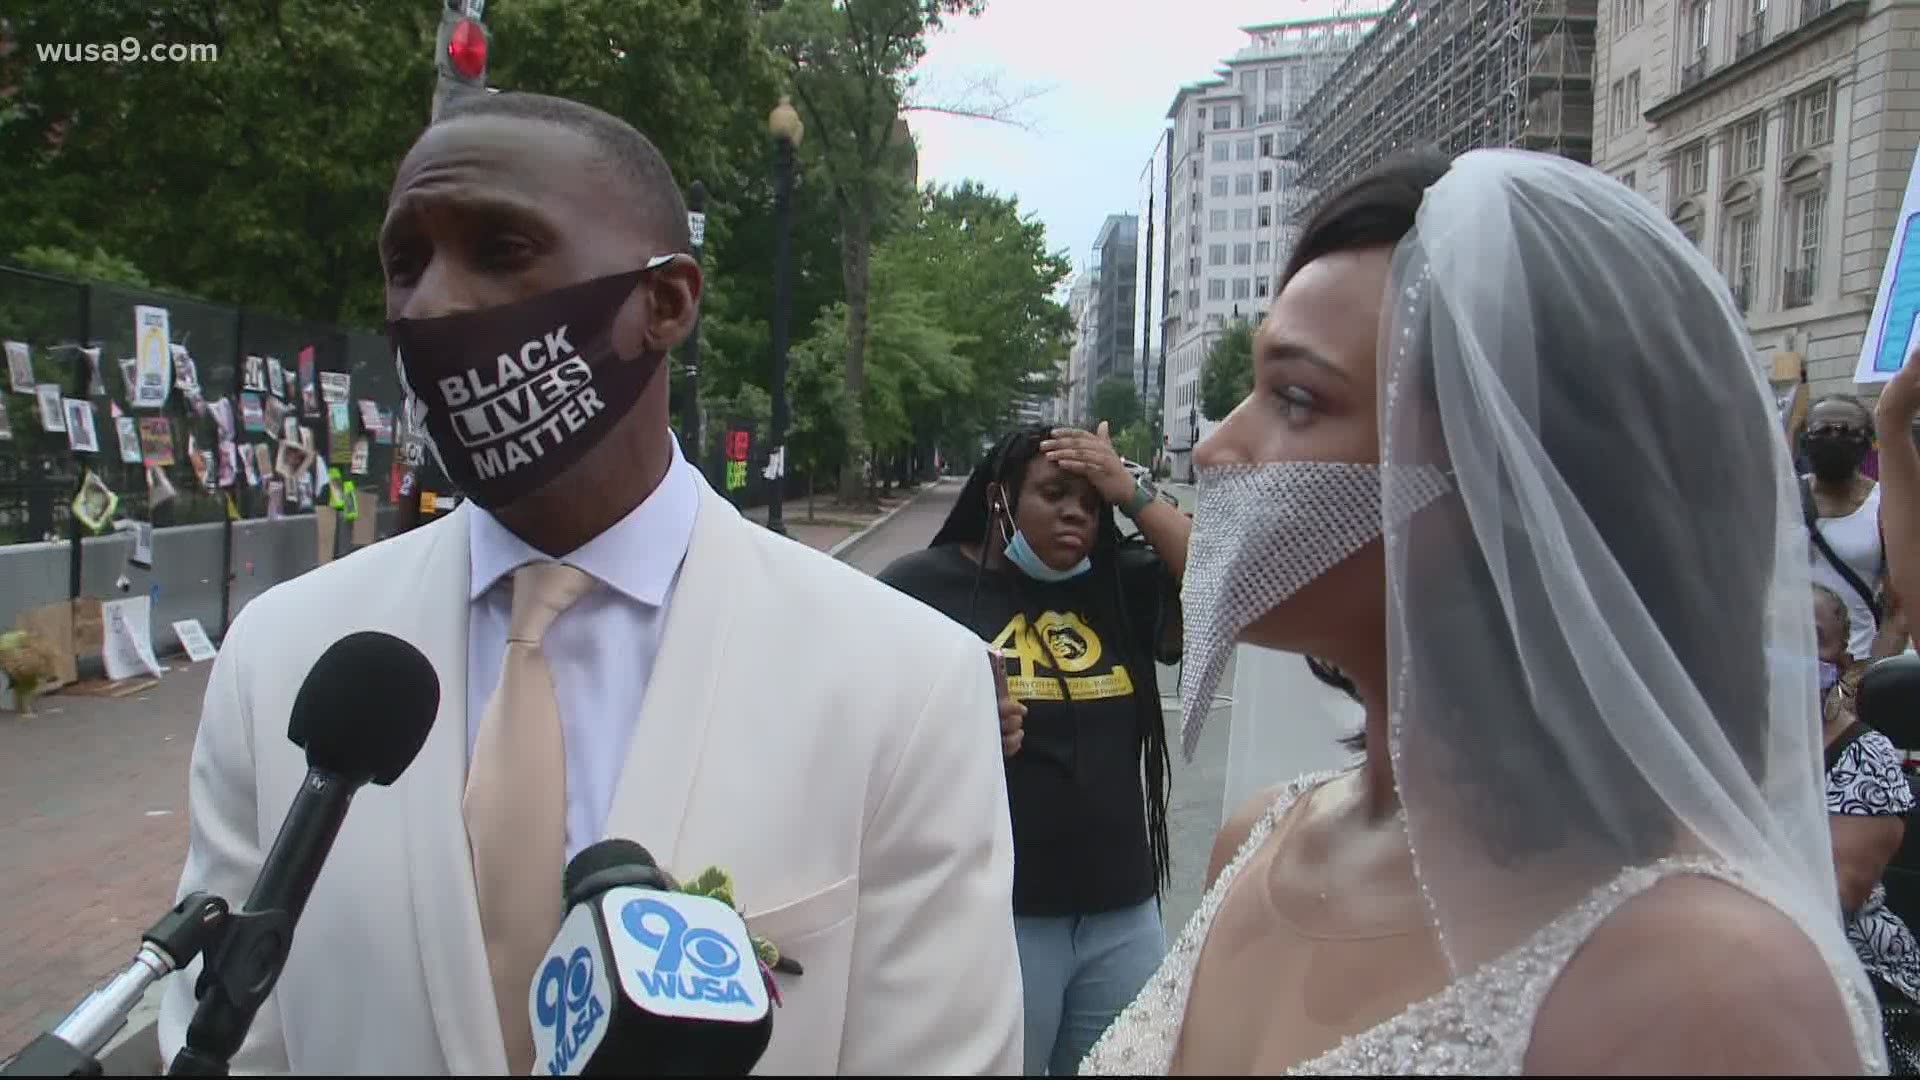 Gregory and Kaci Jones said their vows at Black Lives Matter Plaza after weeks of protests and rallies at the site.